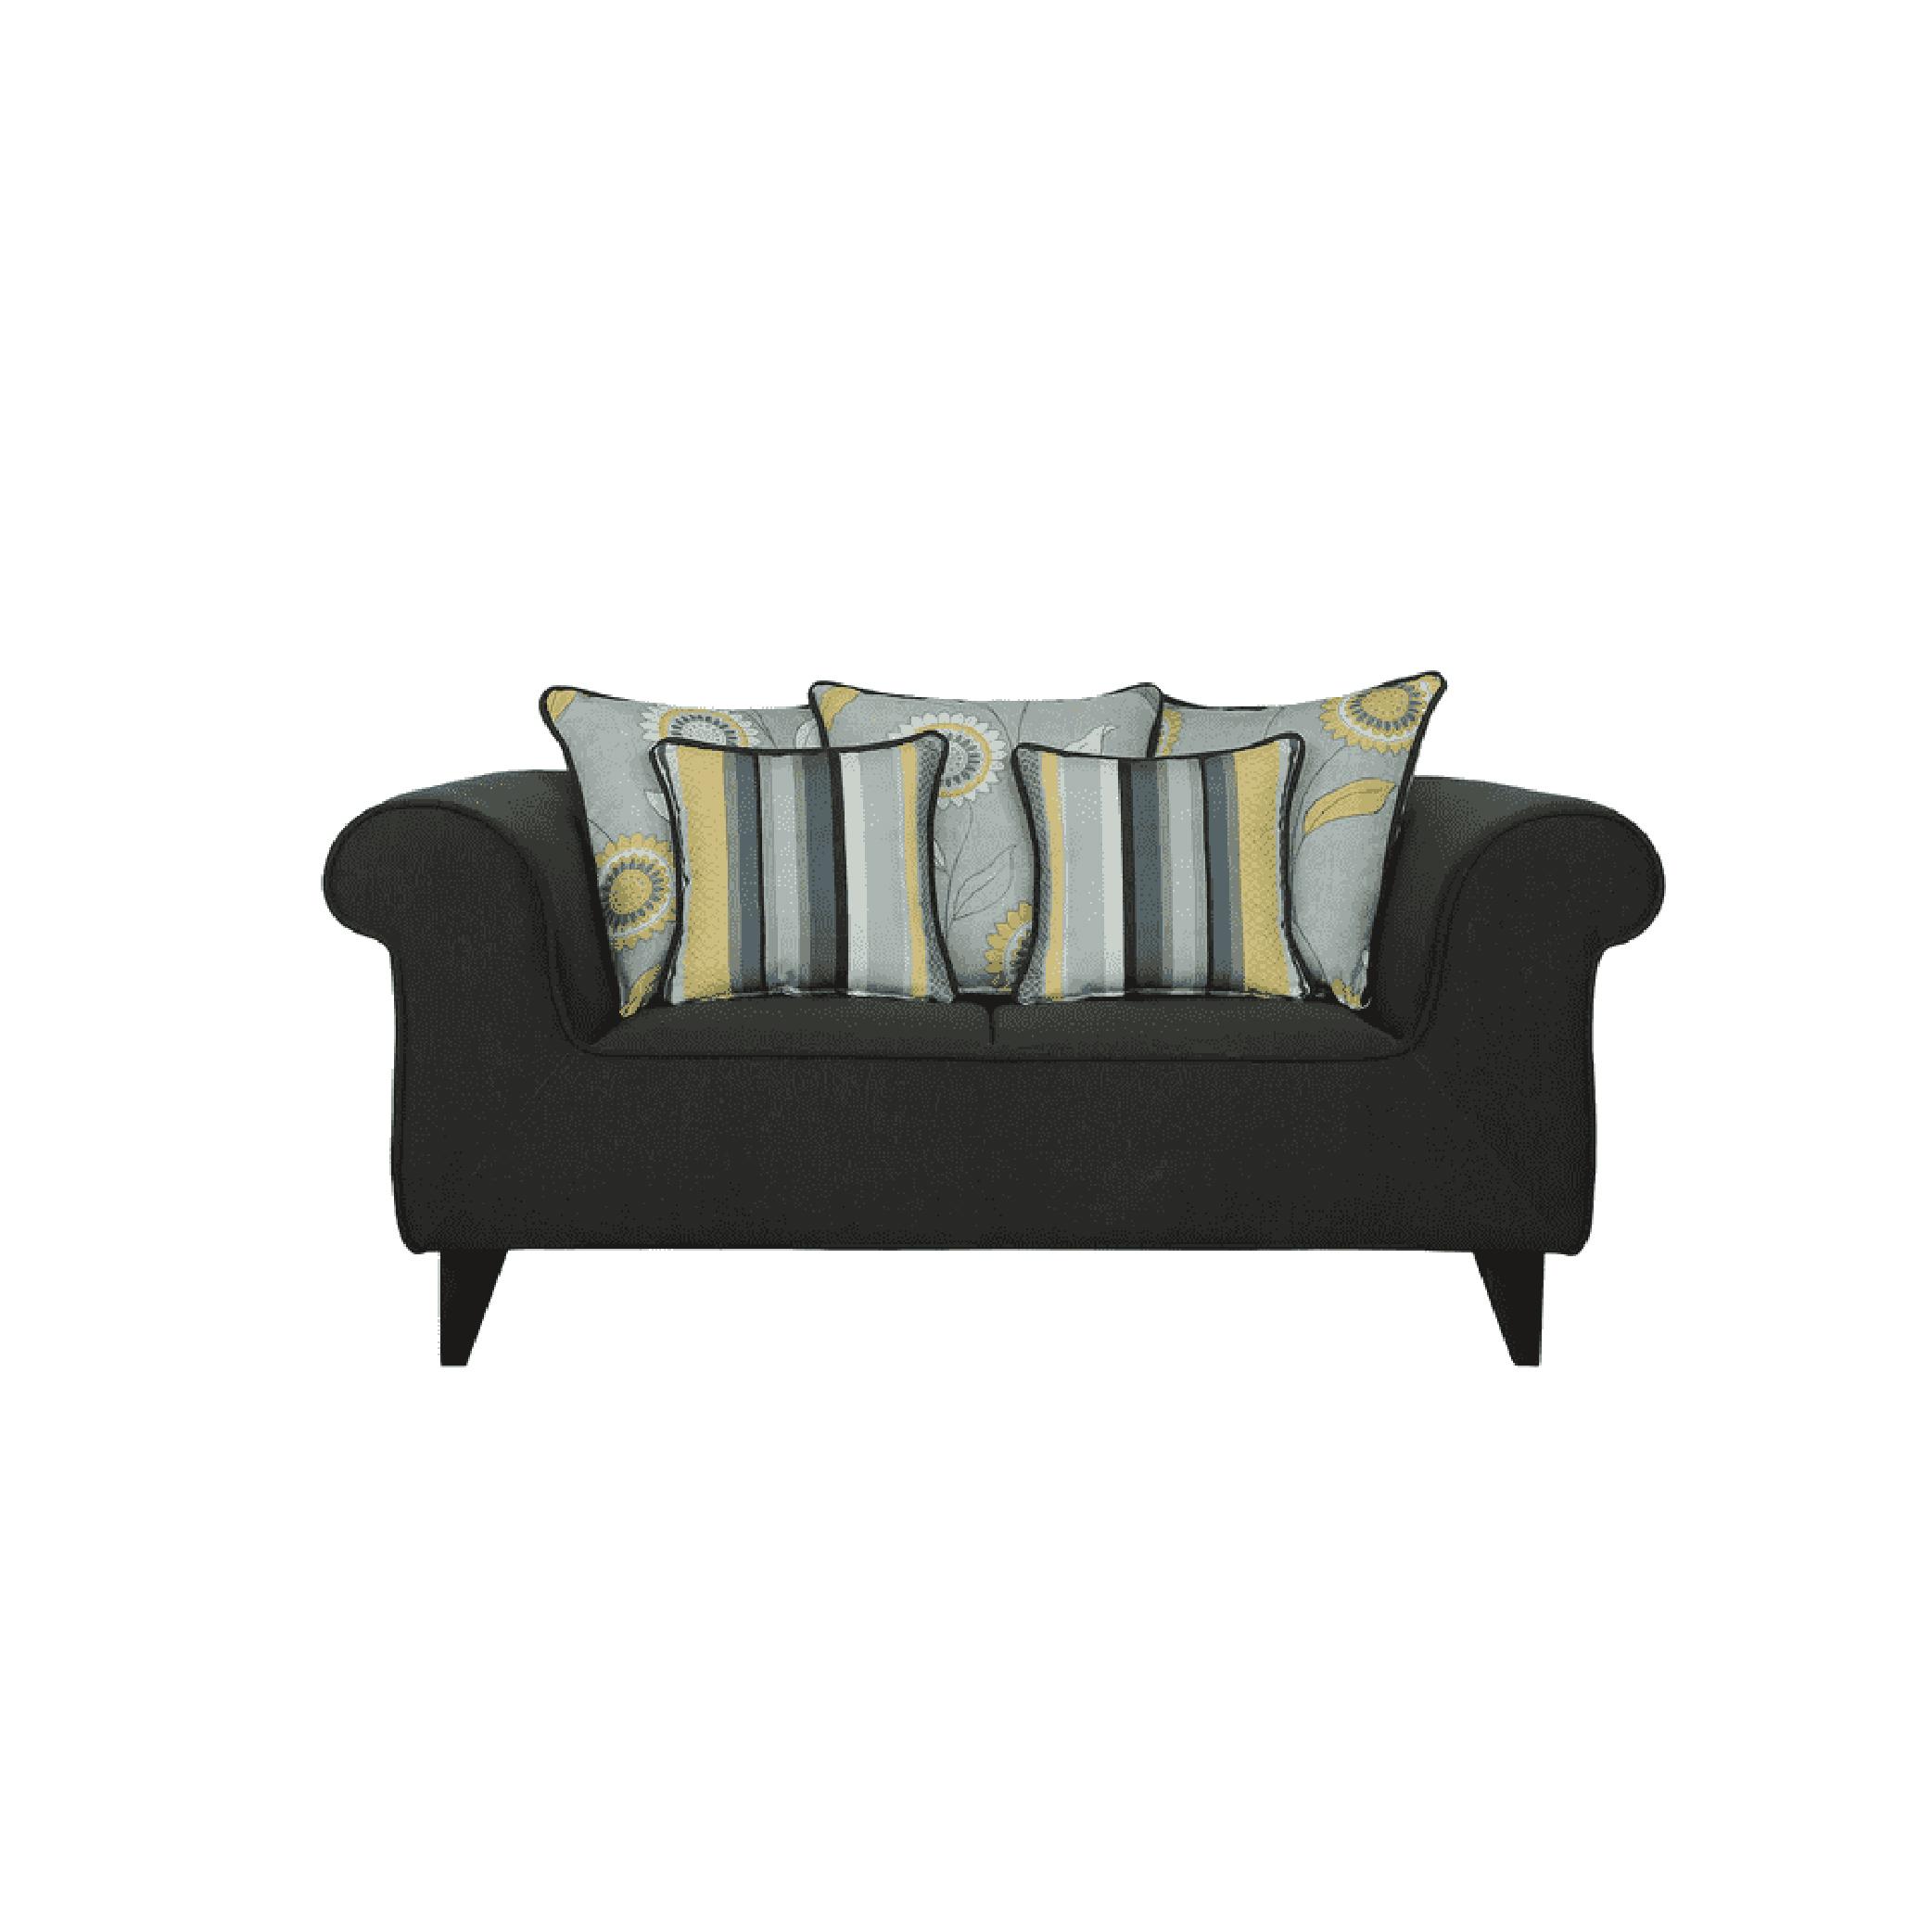 Salerno Two Seater Sofa in Charcoal Grey Colour